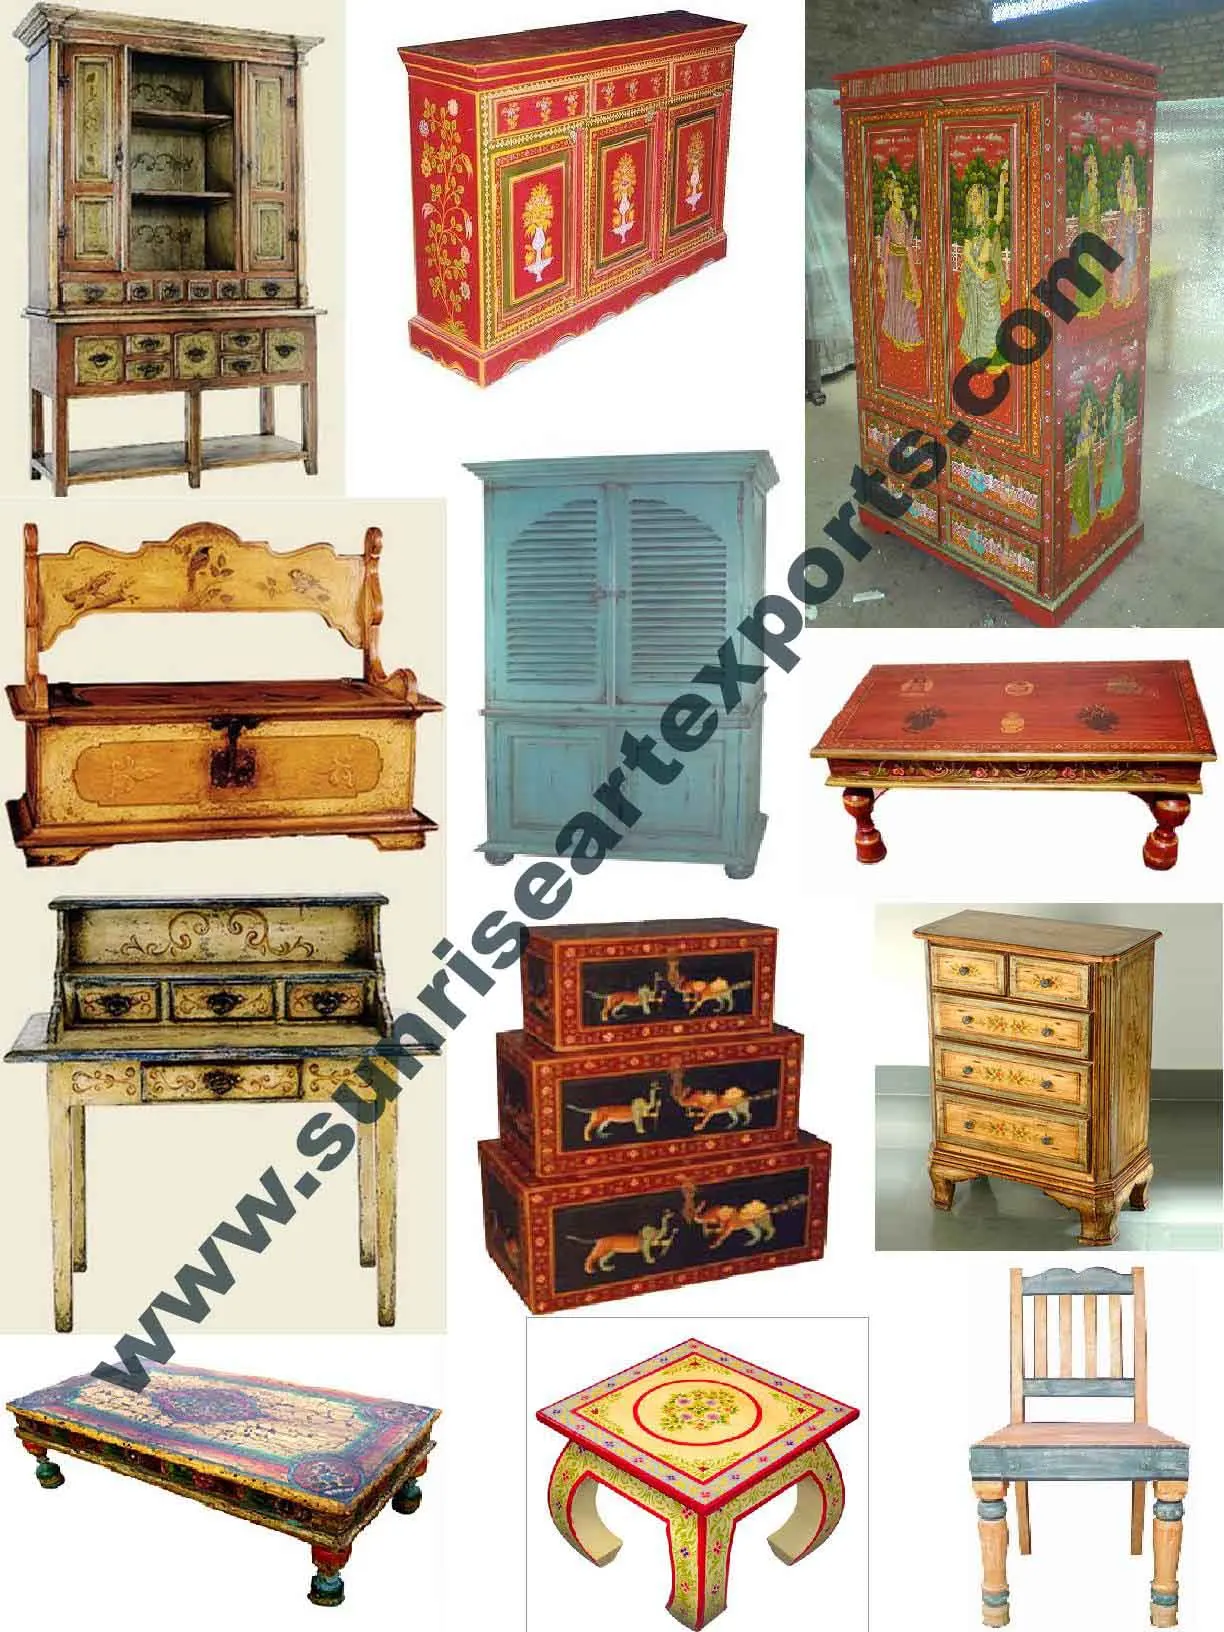 Hand Painted Furniture Antique Reproduction Furniture Handmade